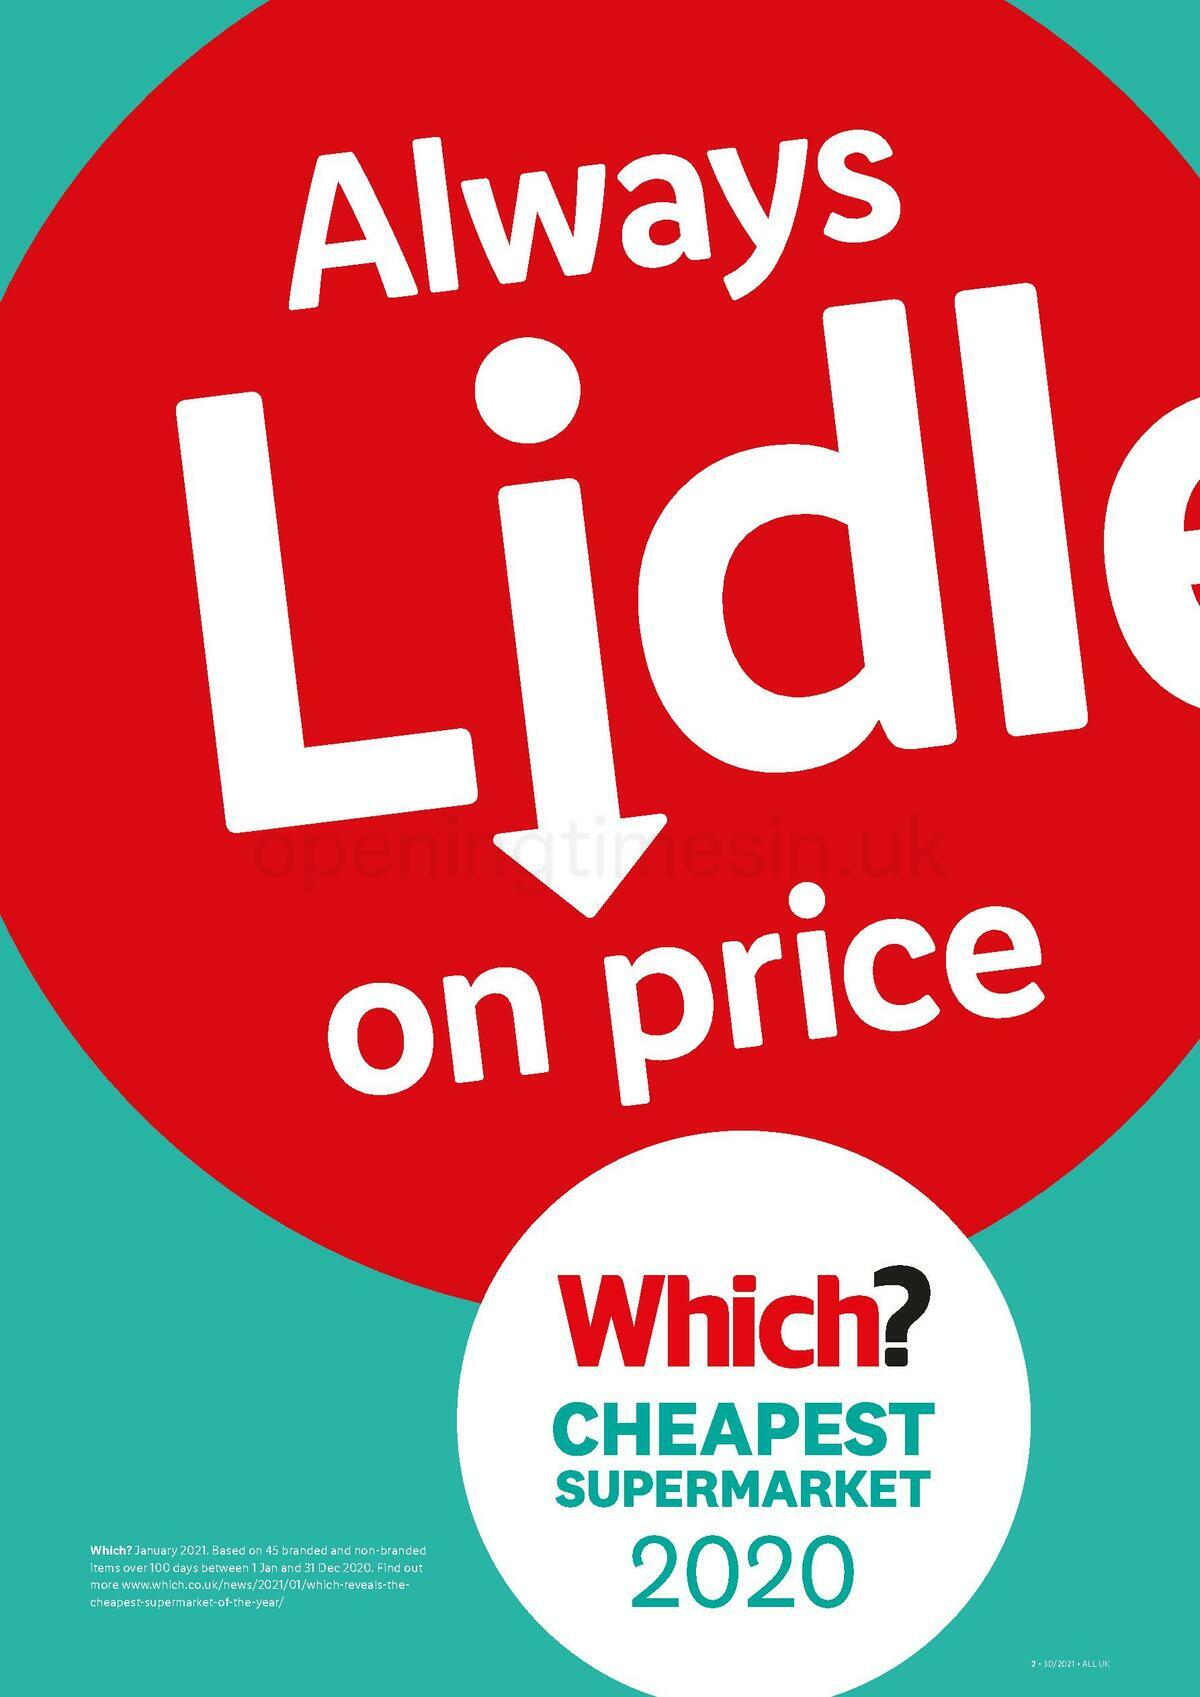 LIDL Offers from 29 July